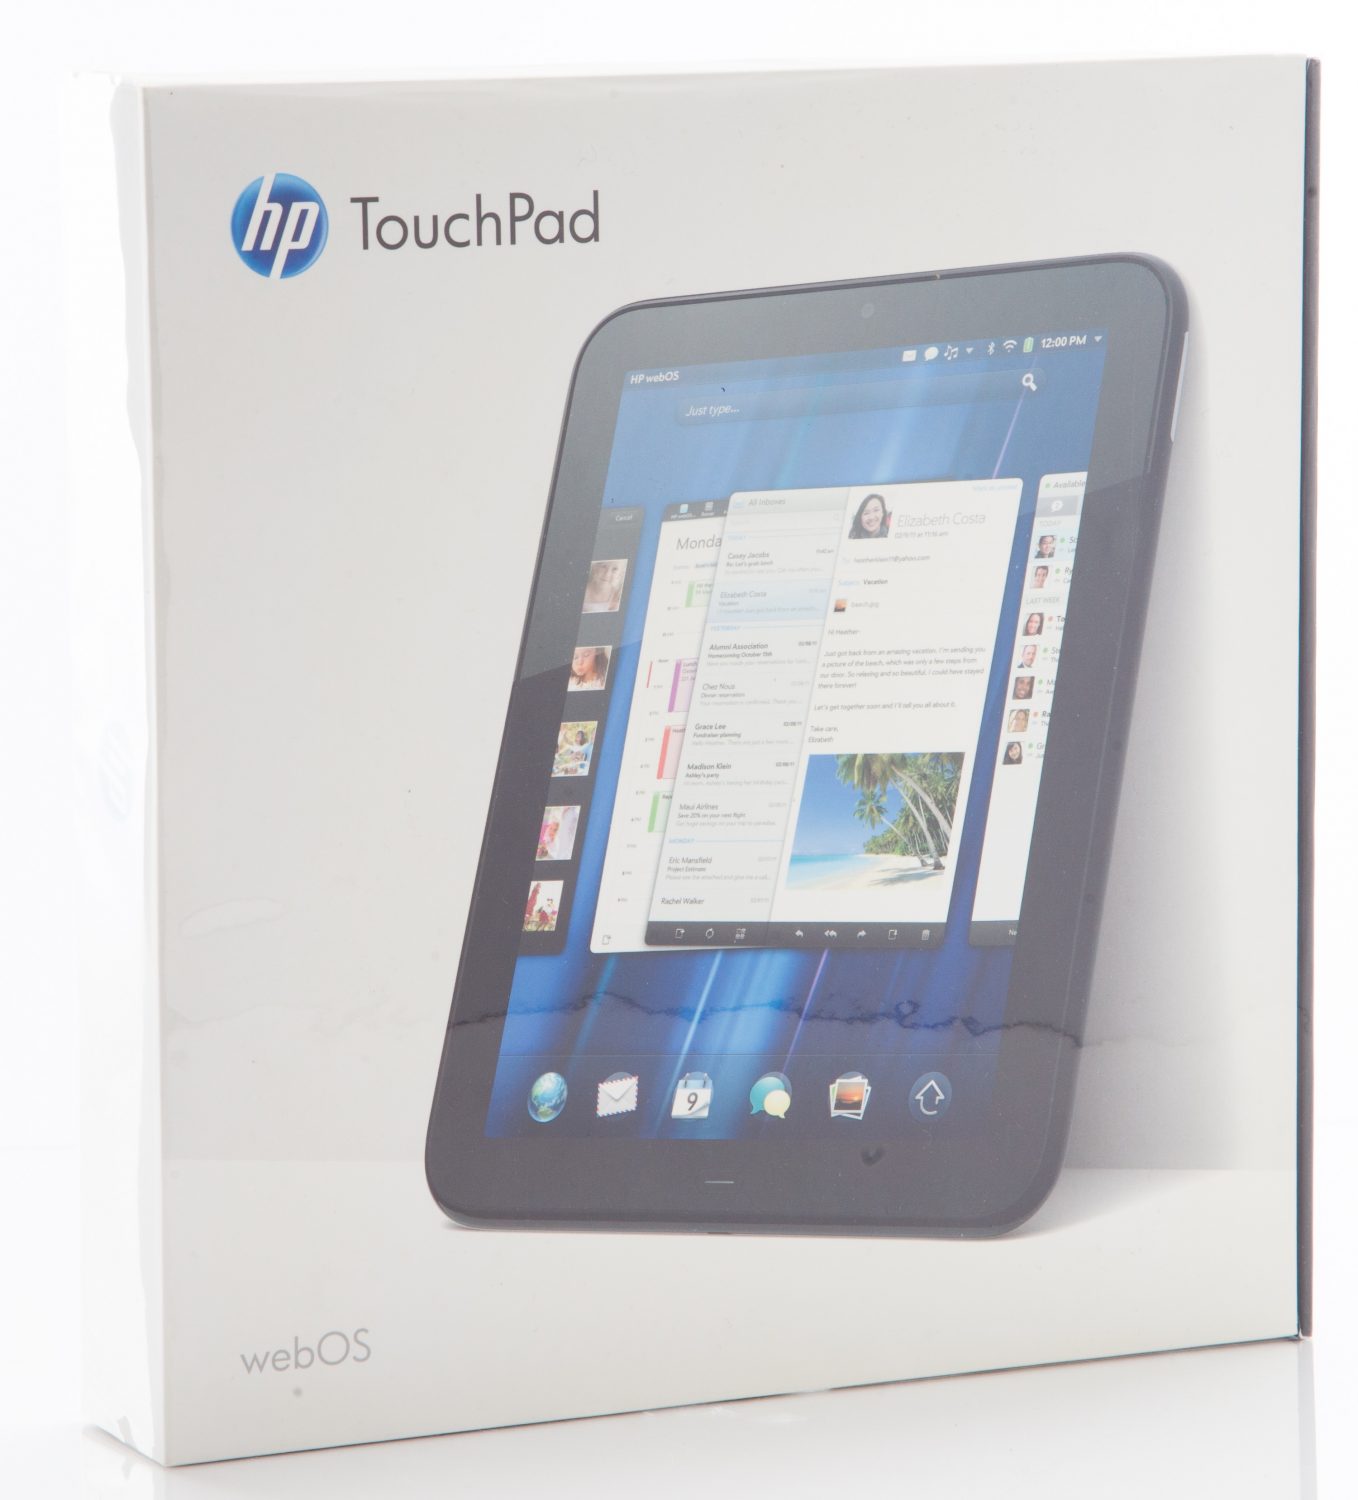 Photo of the box for the Hewlett-Packard TouchPad taken in 2011.